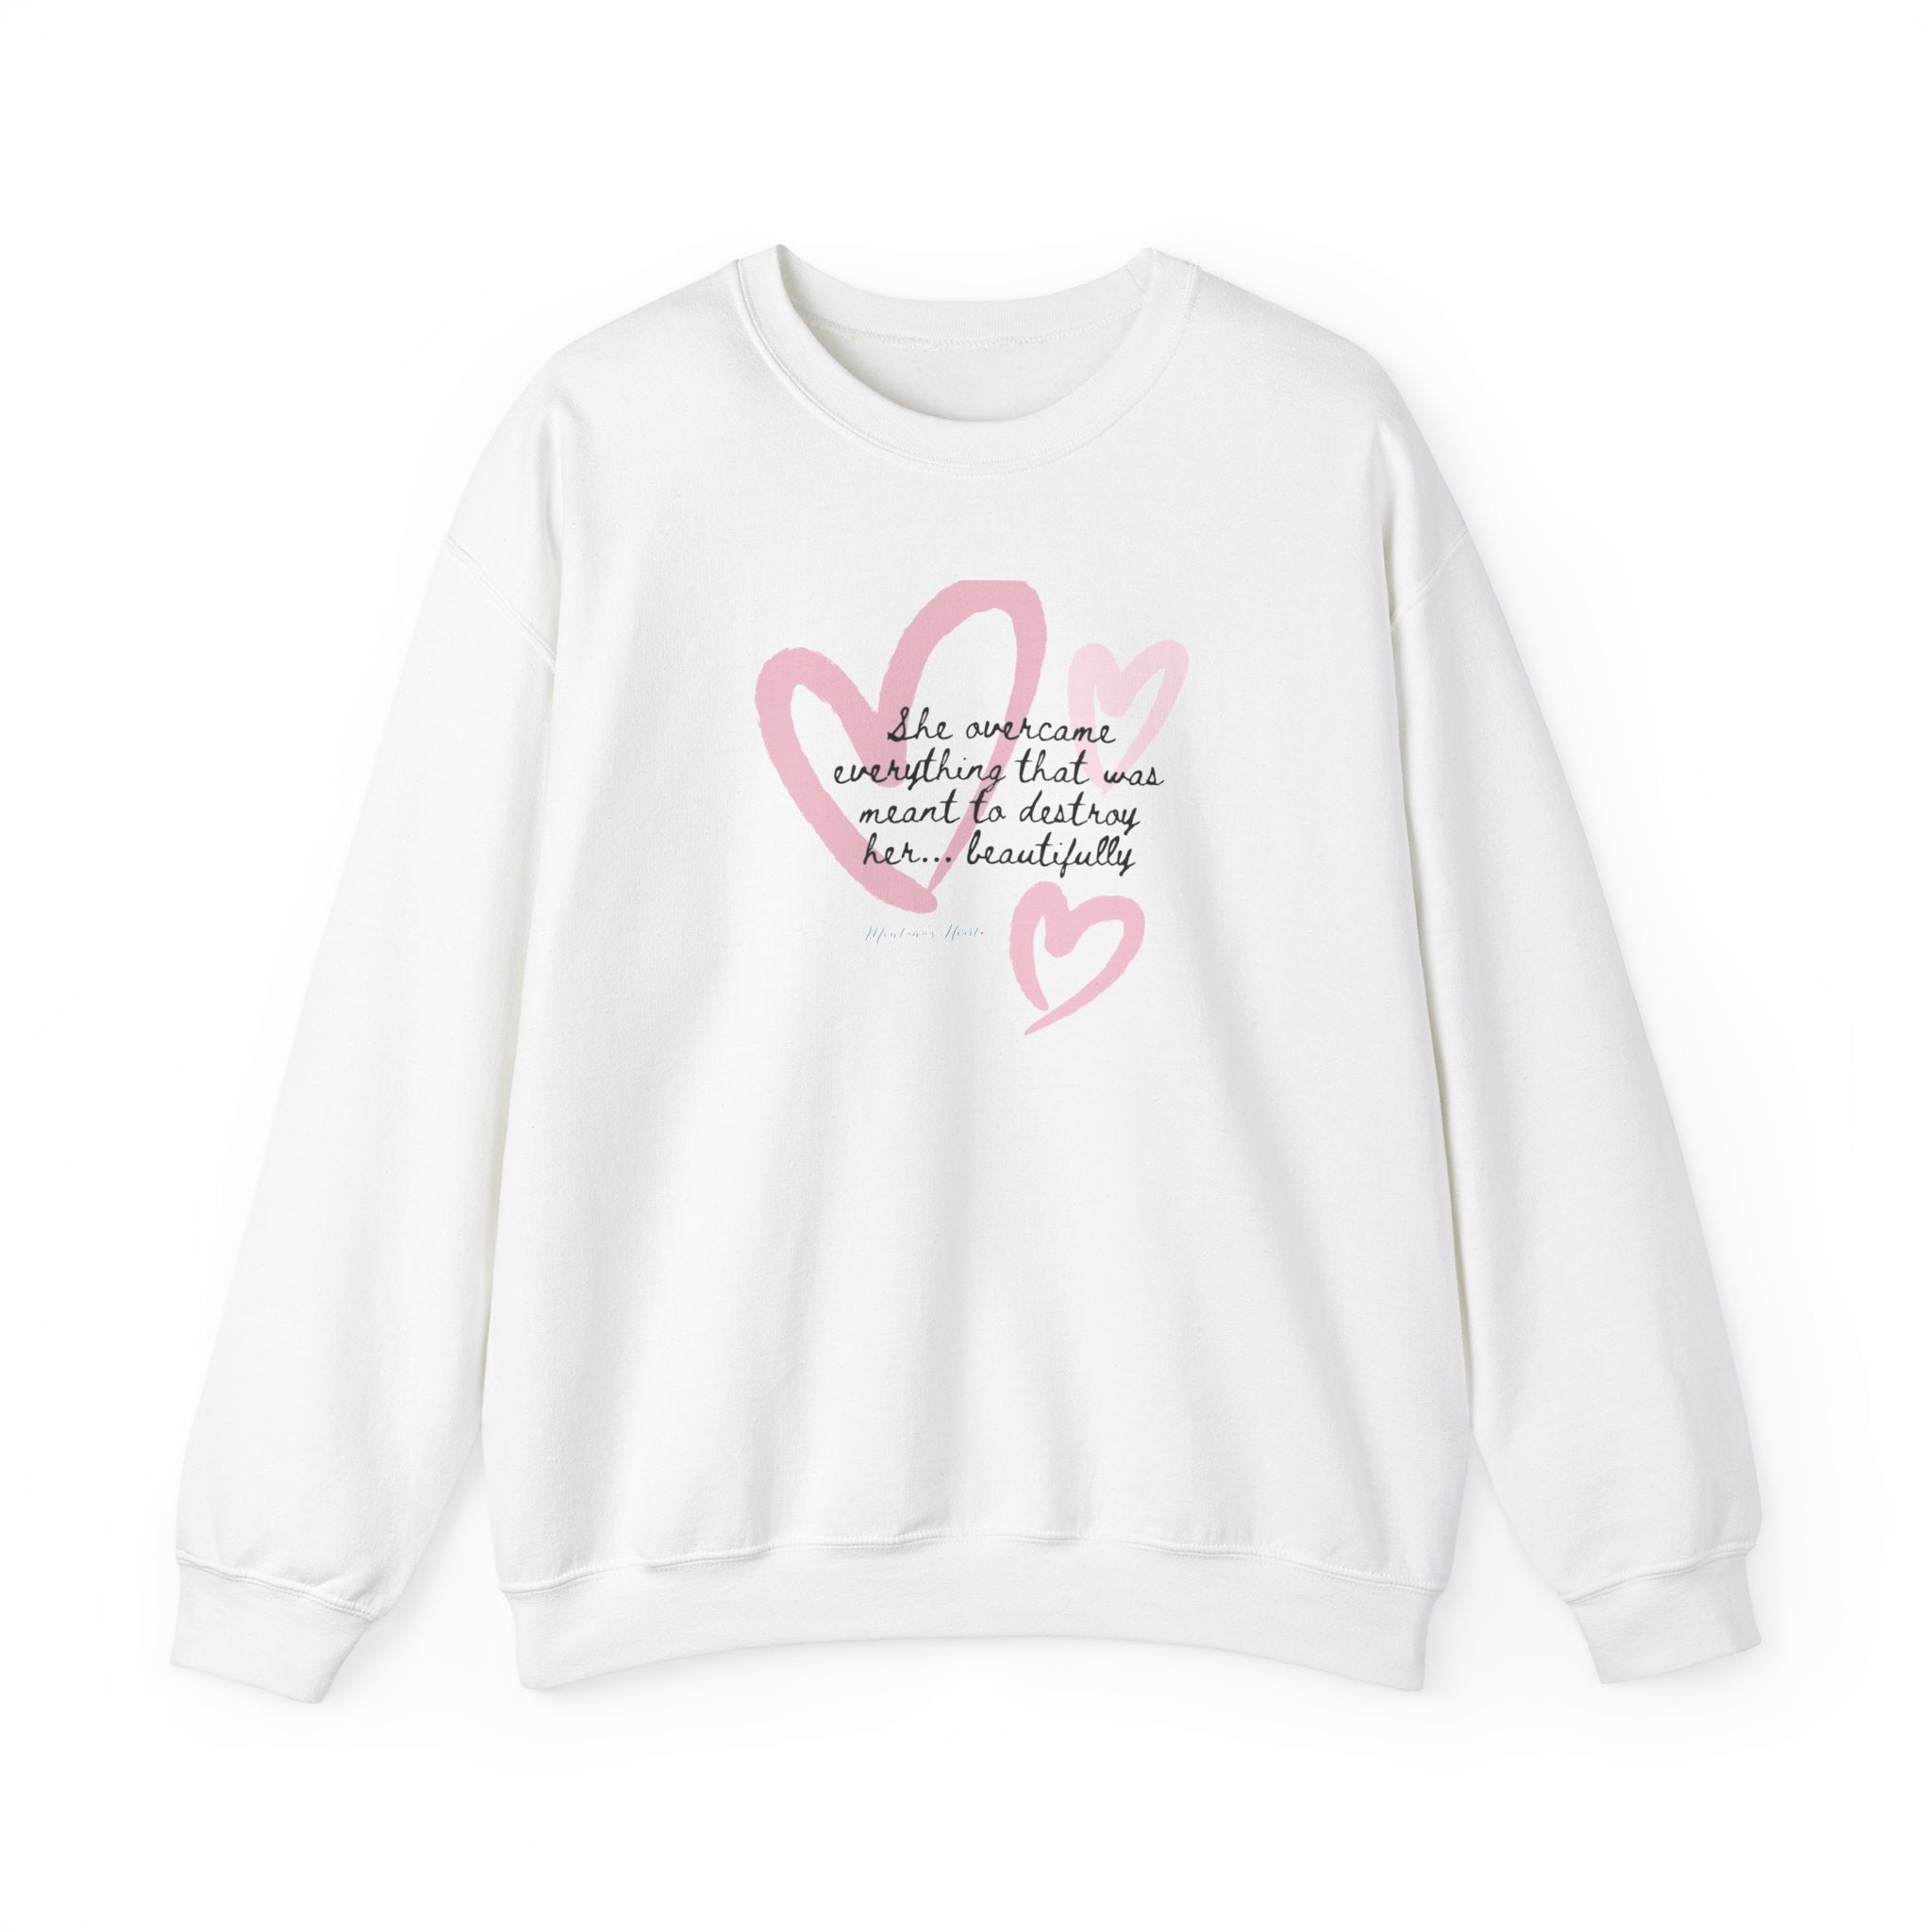 She overcame everything that was meant to destroy her.. beautifully ladies inspirational sweatshirt